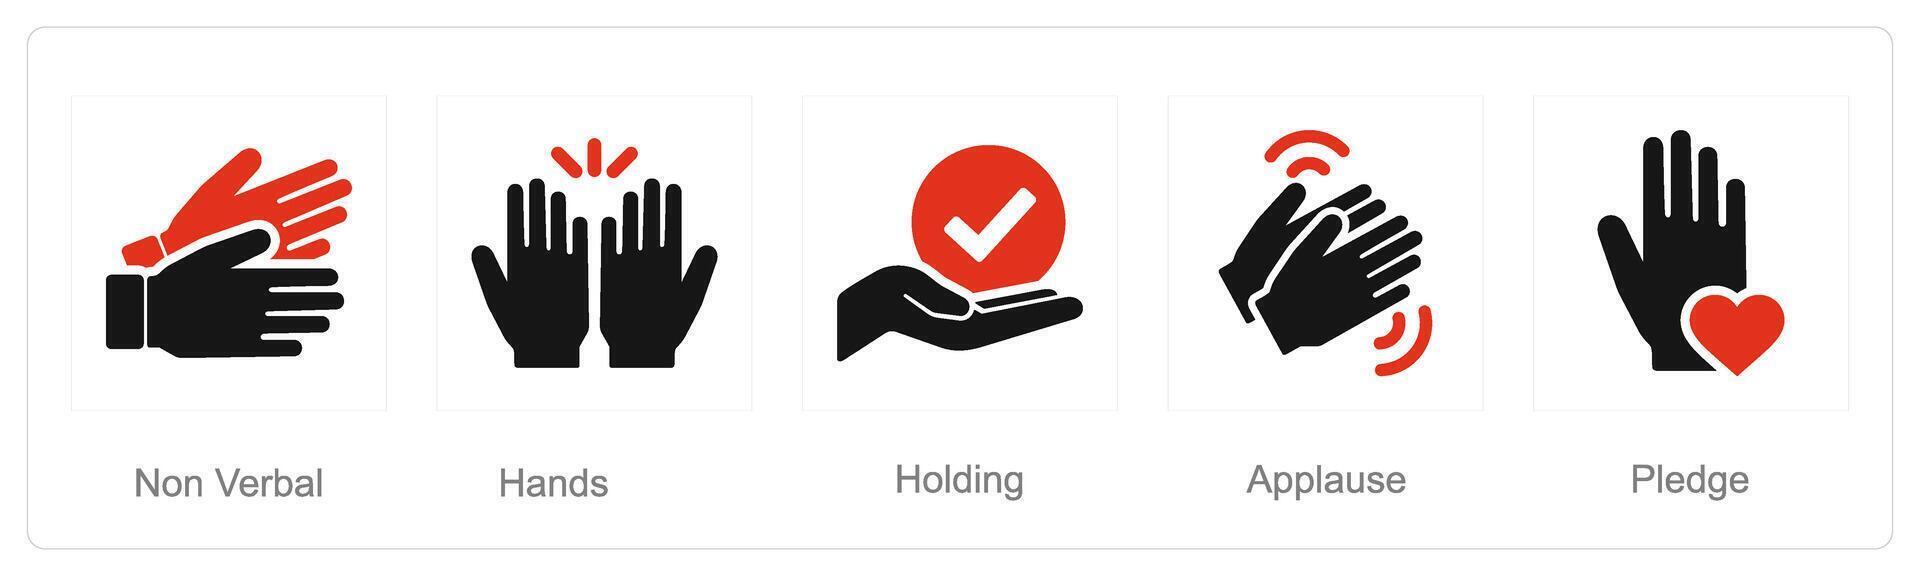 A set of 5 Hands icons as non verbal, hands, holding vector